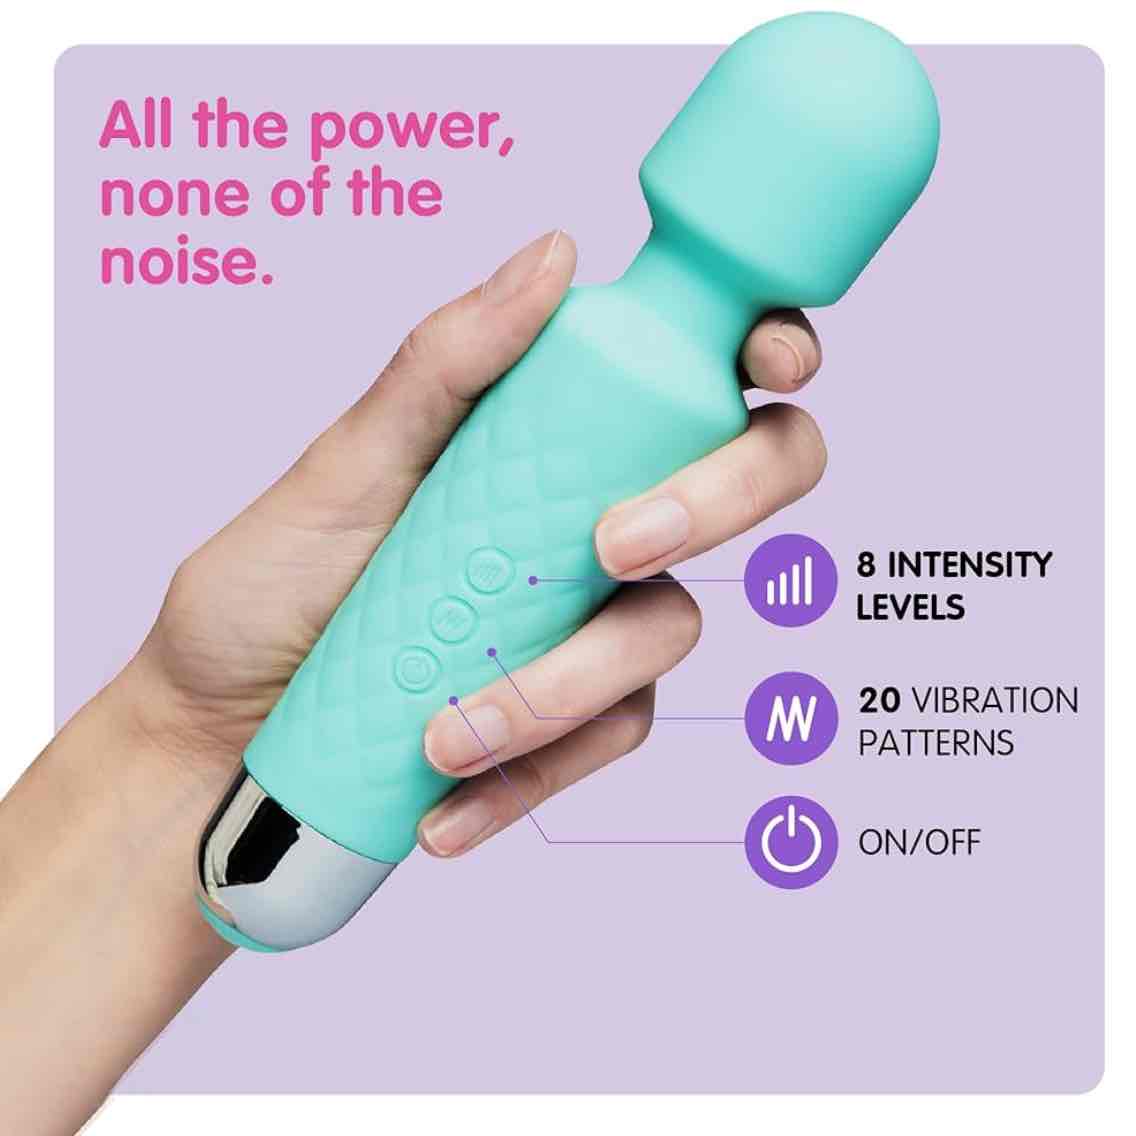 Rechargeable Personal Massager Handheld - Large Edition - Cordless - 8 Powerful Speeds & 20 Vibration Patterns - Travel Bag Included (Black)